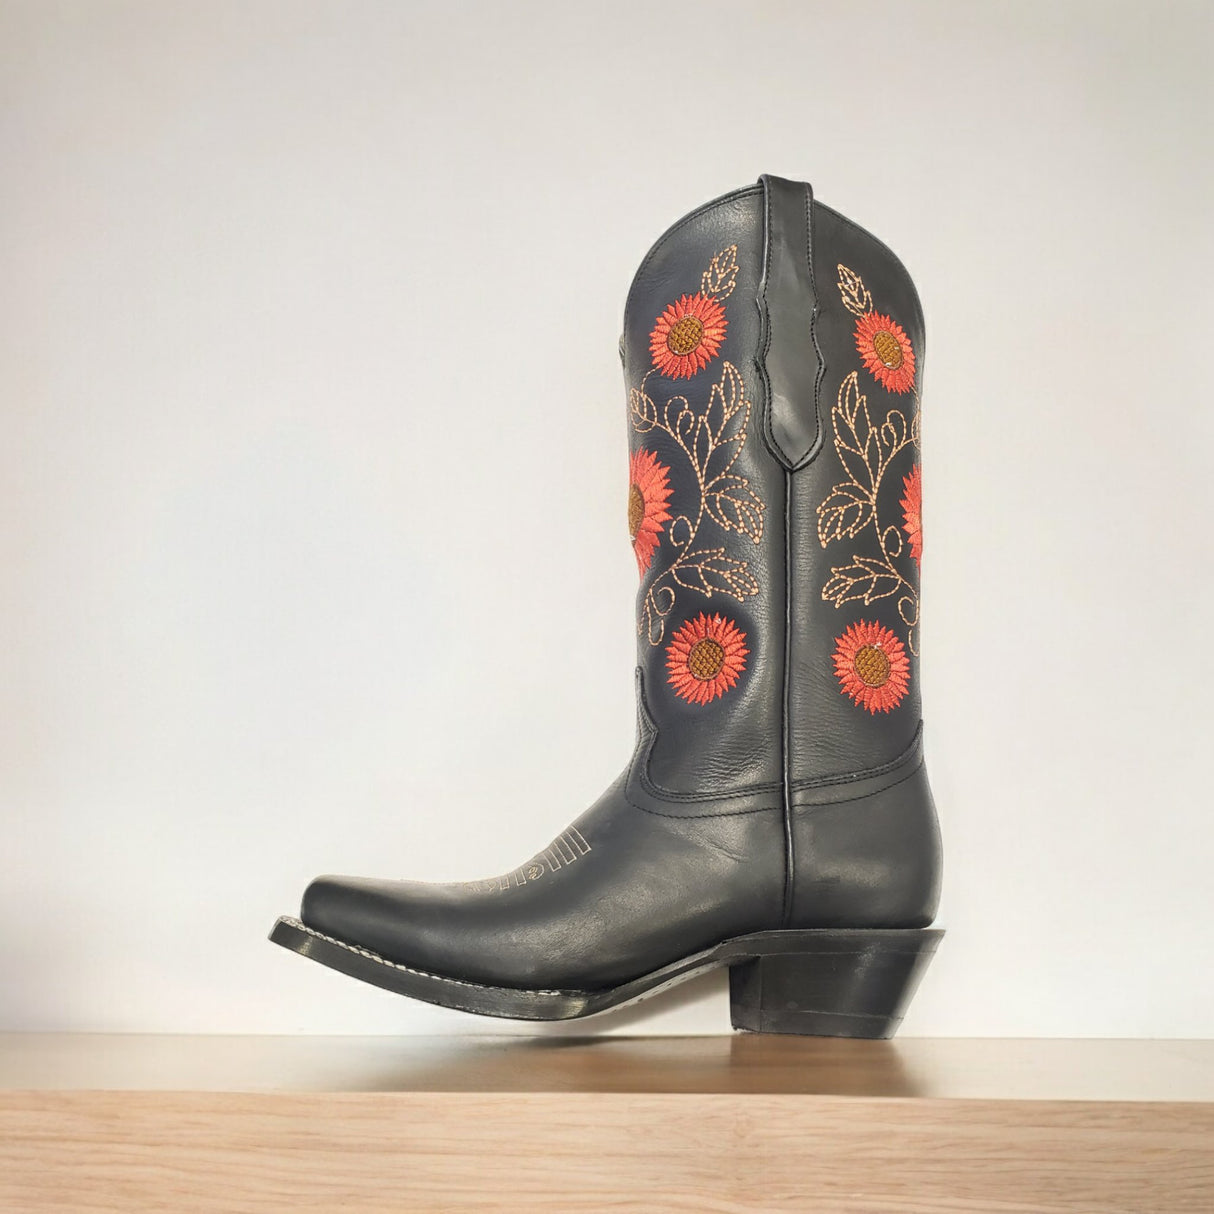 Women's Genuine Leather Flower Embroidered Tube Rodeo Cowboy Boots 'El General' *BLACK-51163* - BELLEZA'S - Women's Genuine Leather Flower Embroidered Tube Rodeo Cowboy Boots 'El General' *BLACK-51163* - Botas Para Damas - 51163 5